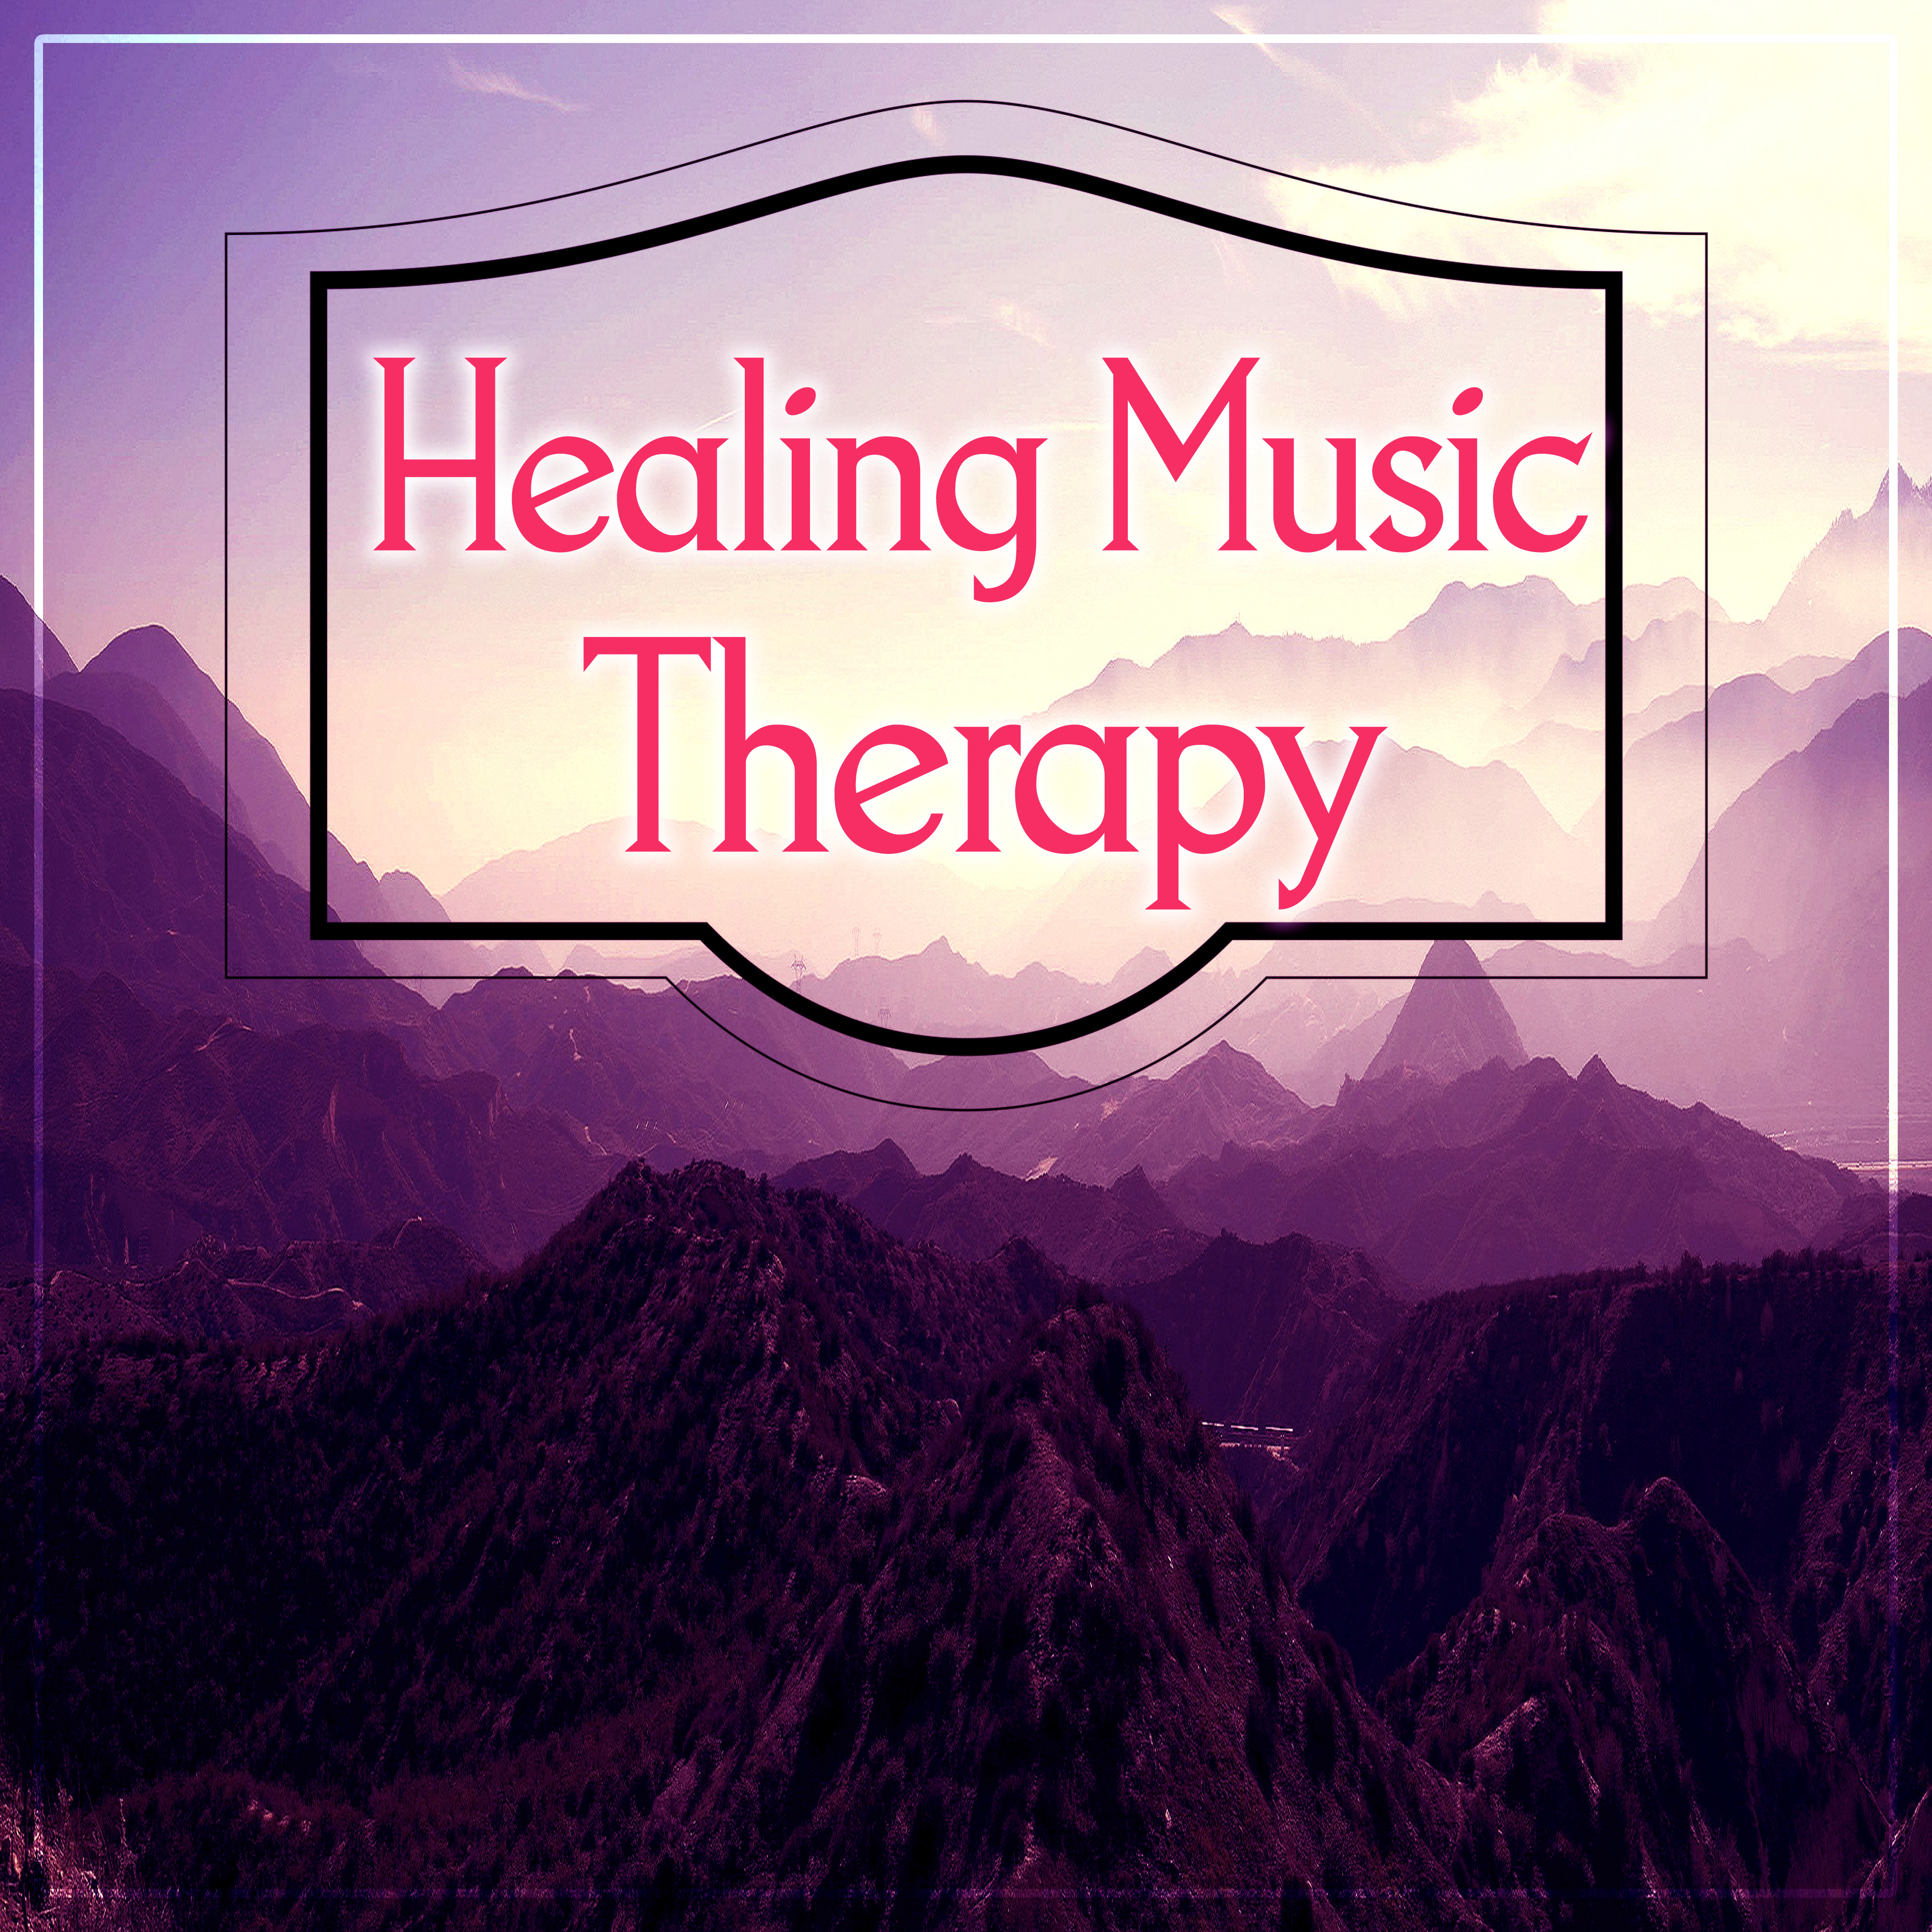 Healing Music Therapy  Calm Sounds of Nature for Relax, Feel Better with Soothing New Age Music, Best Tracks for Meditation  Deep Relaxation